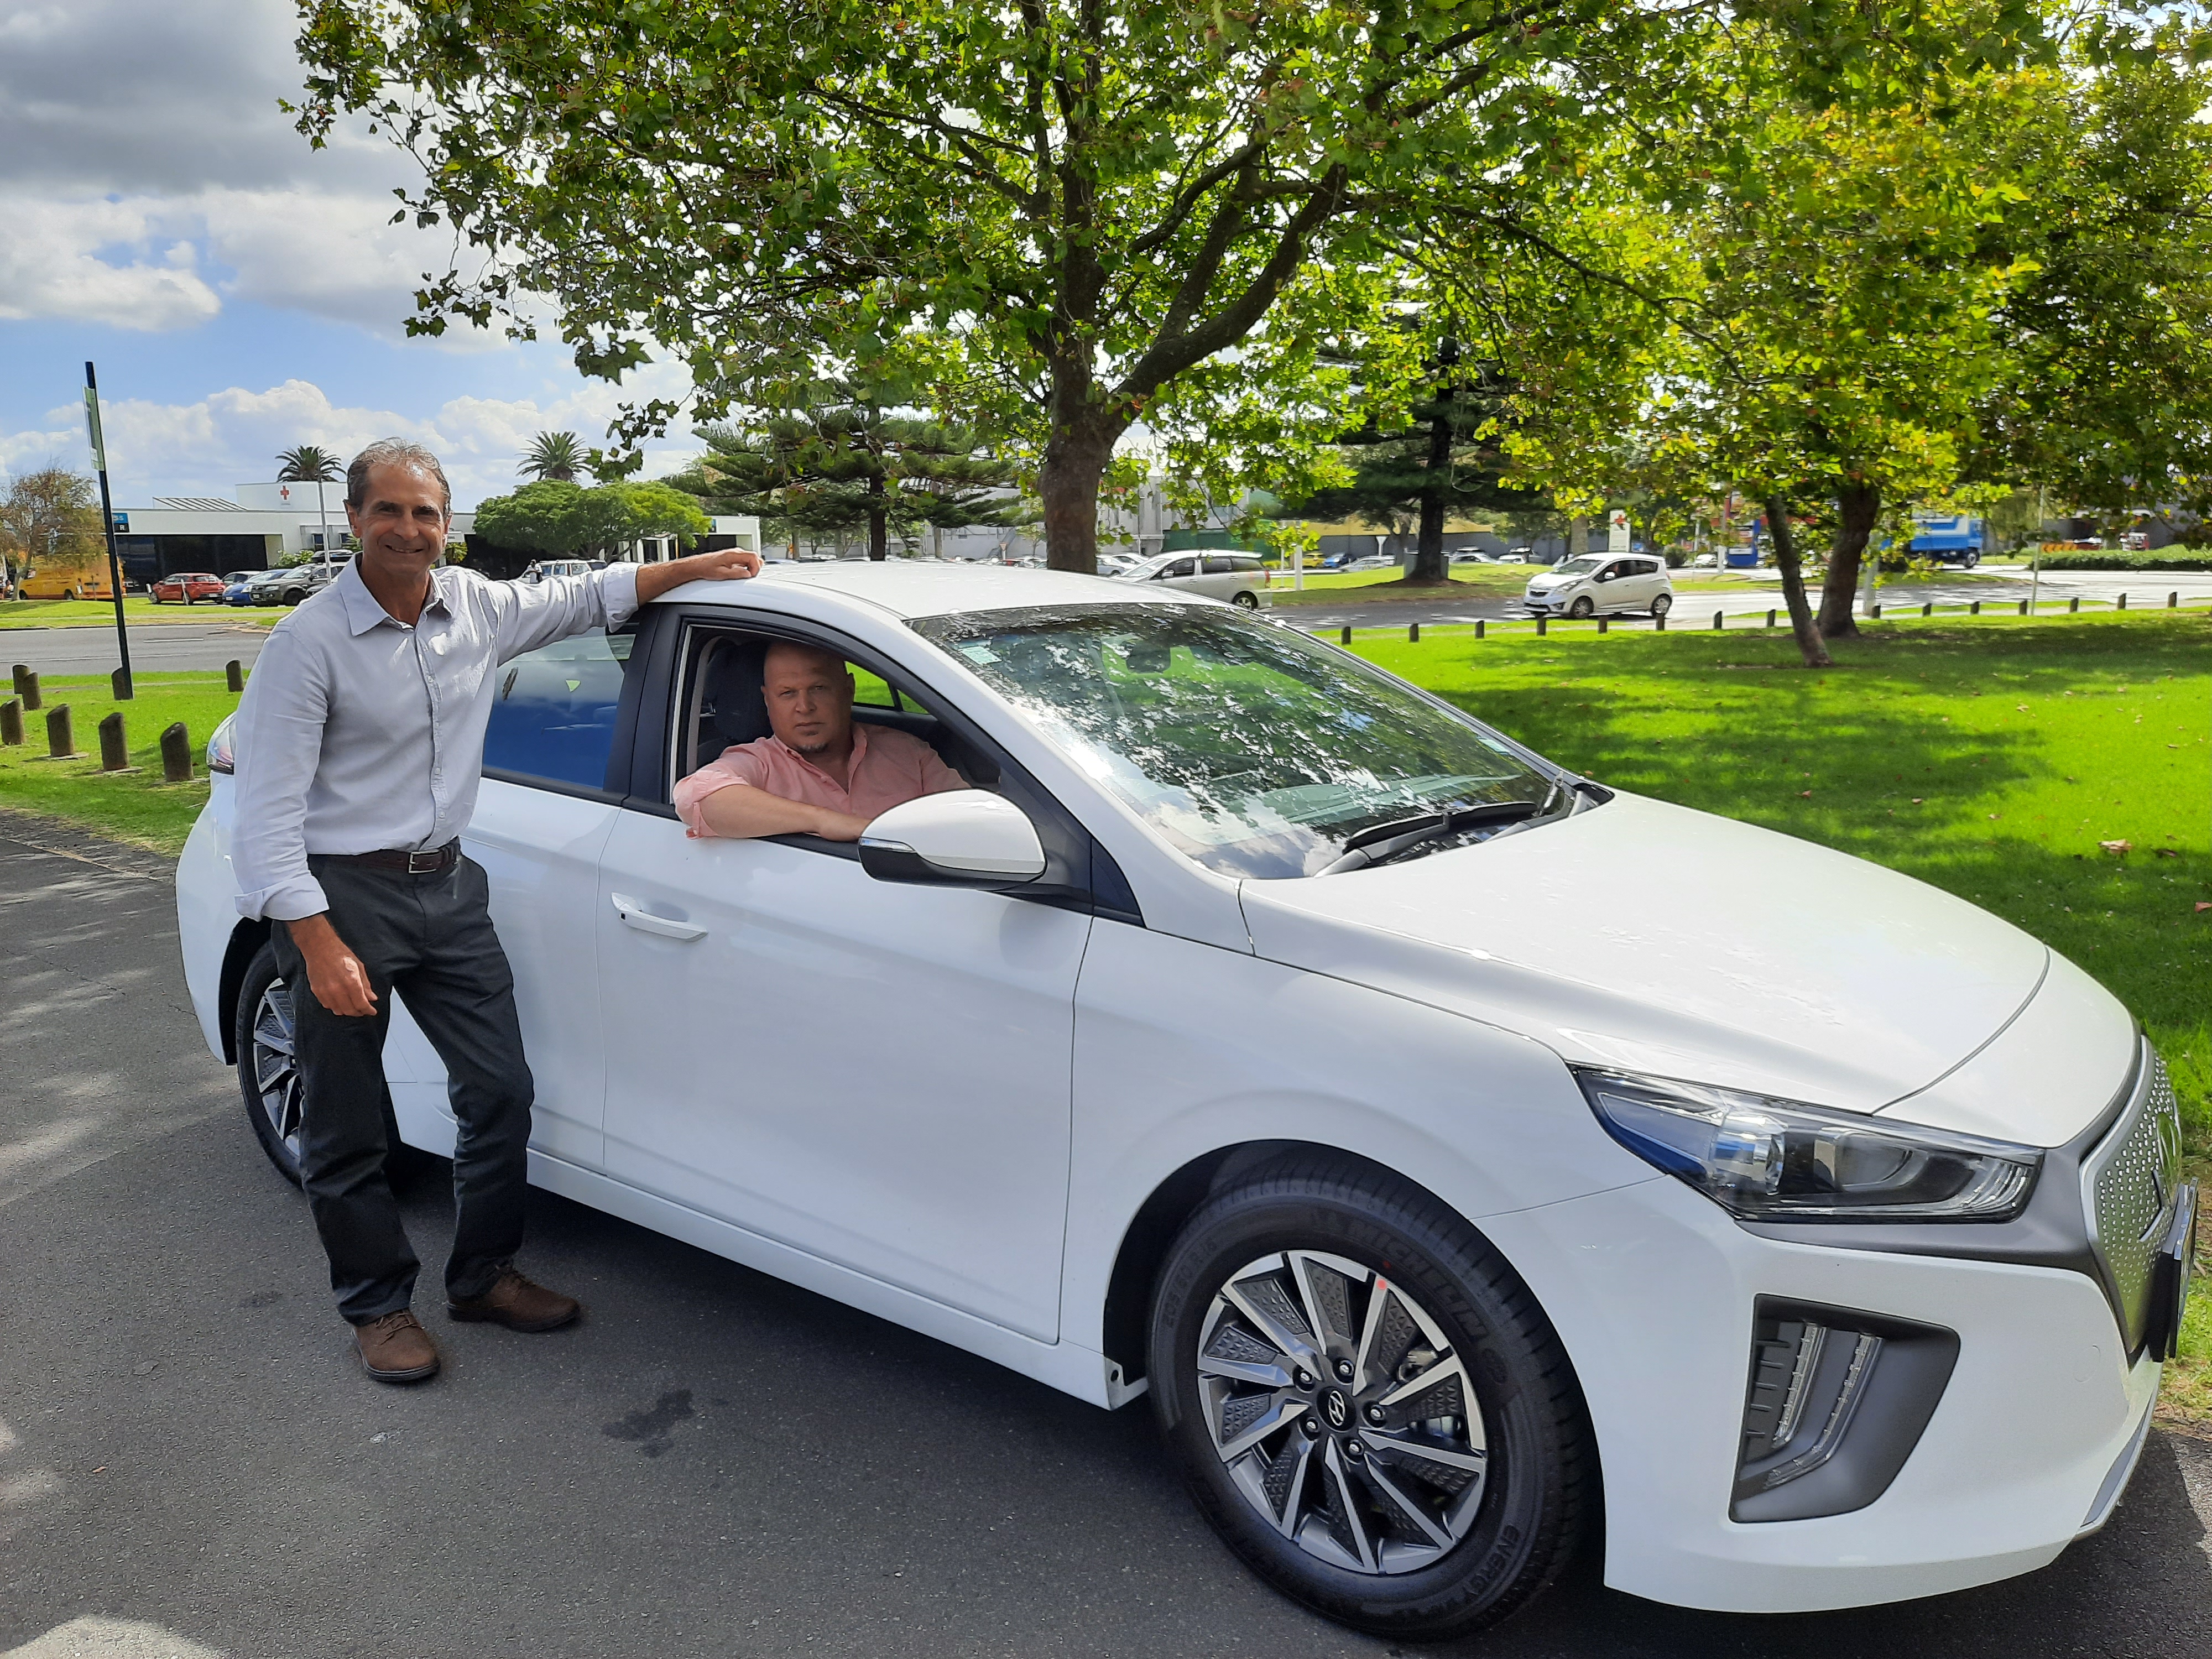 Left to right: Andrew Czar, Team Lead Workplace Services North, and Kevin Meadows, Domain Lead Workplace Services, in one of the new EVs in Manukau.